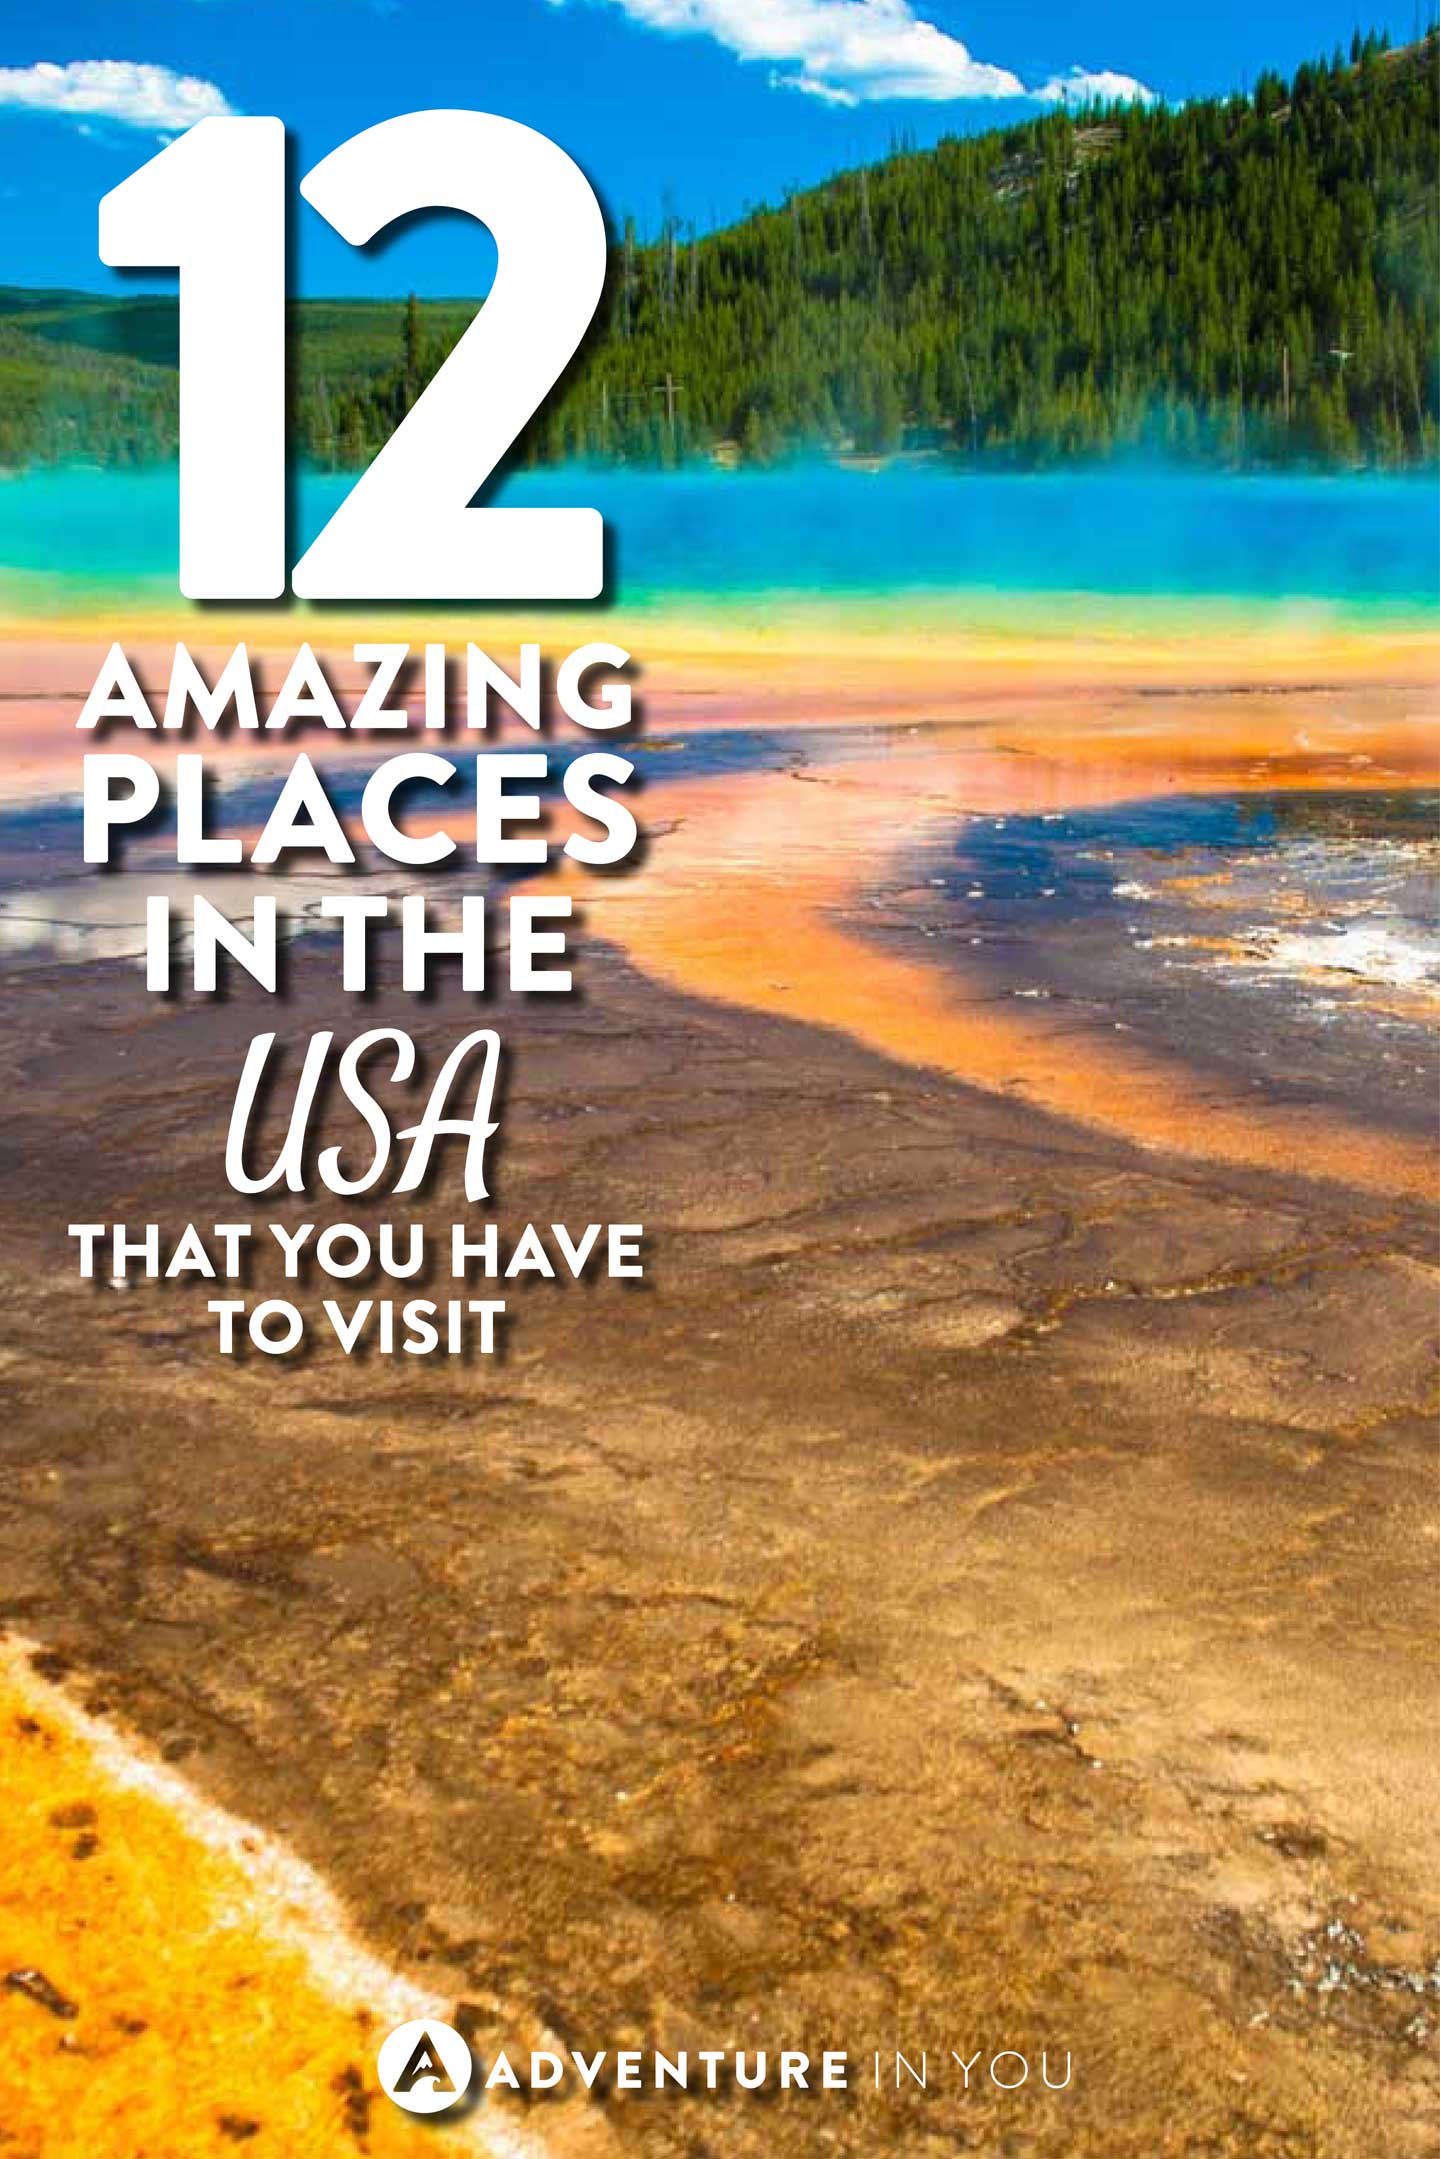 USA TRAVEL | Looking for some inspiration? Take a look at the most amazing places in the usa that you have to see. The US if full of insanely beautiful places from canyons, national psarks, to incredible beaches.